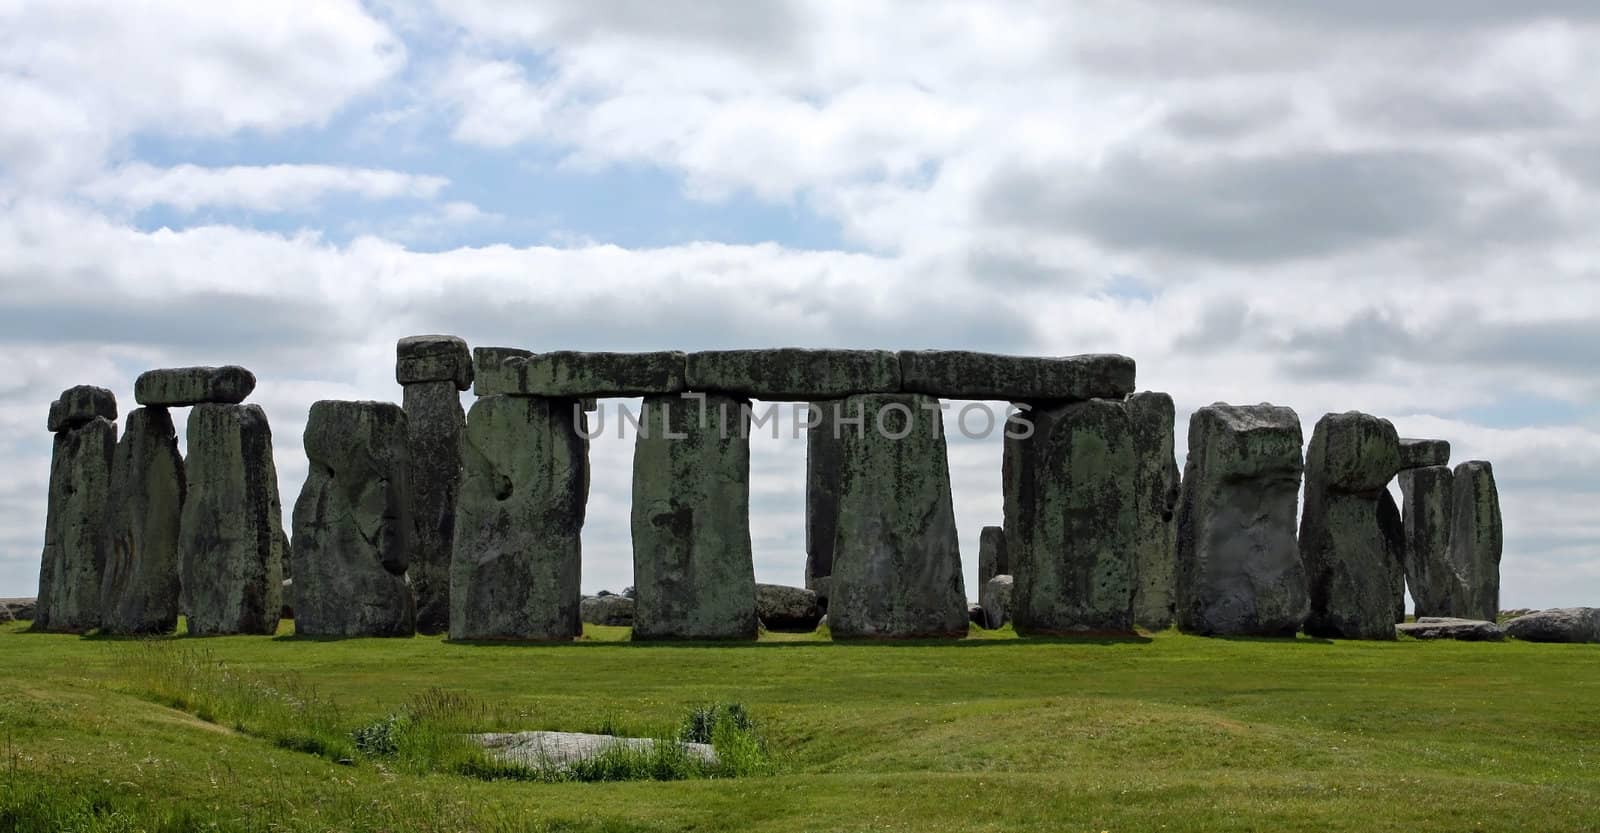 A view of England's Stonehenge against a blue sky and green grass.
